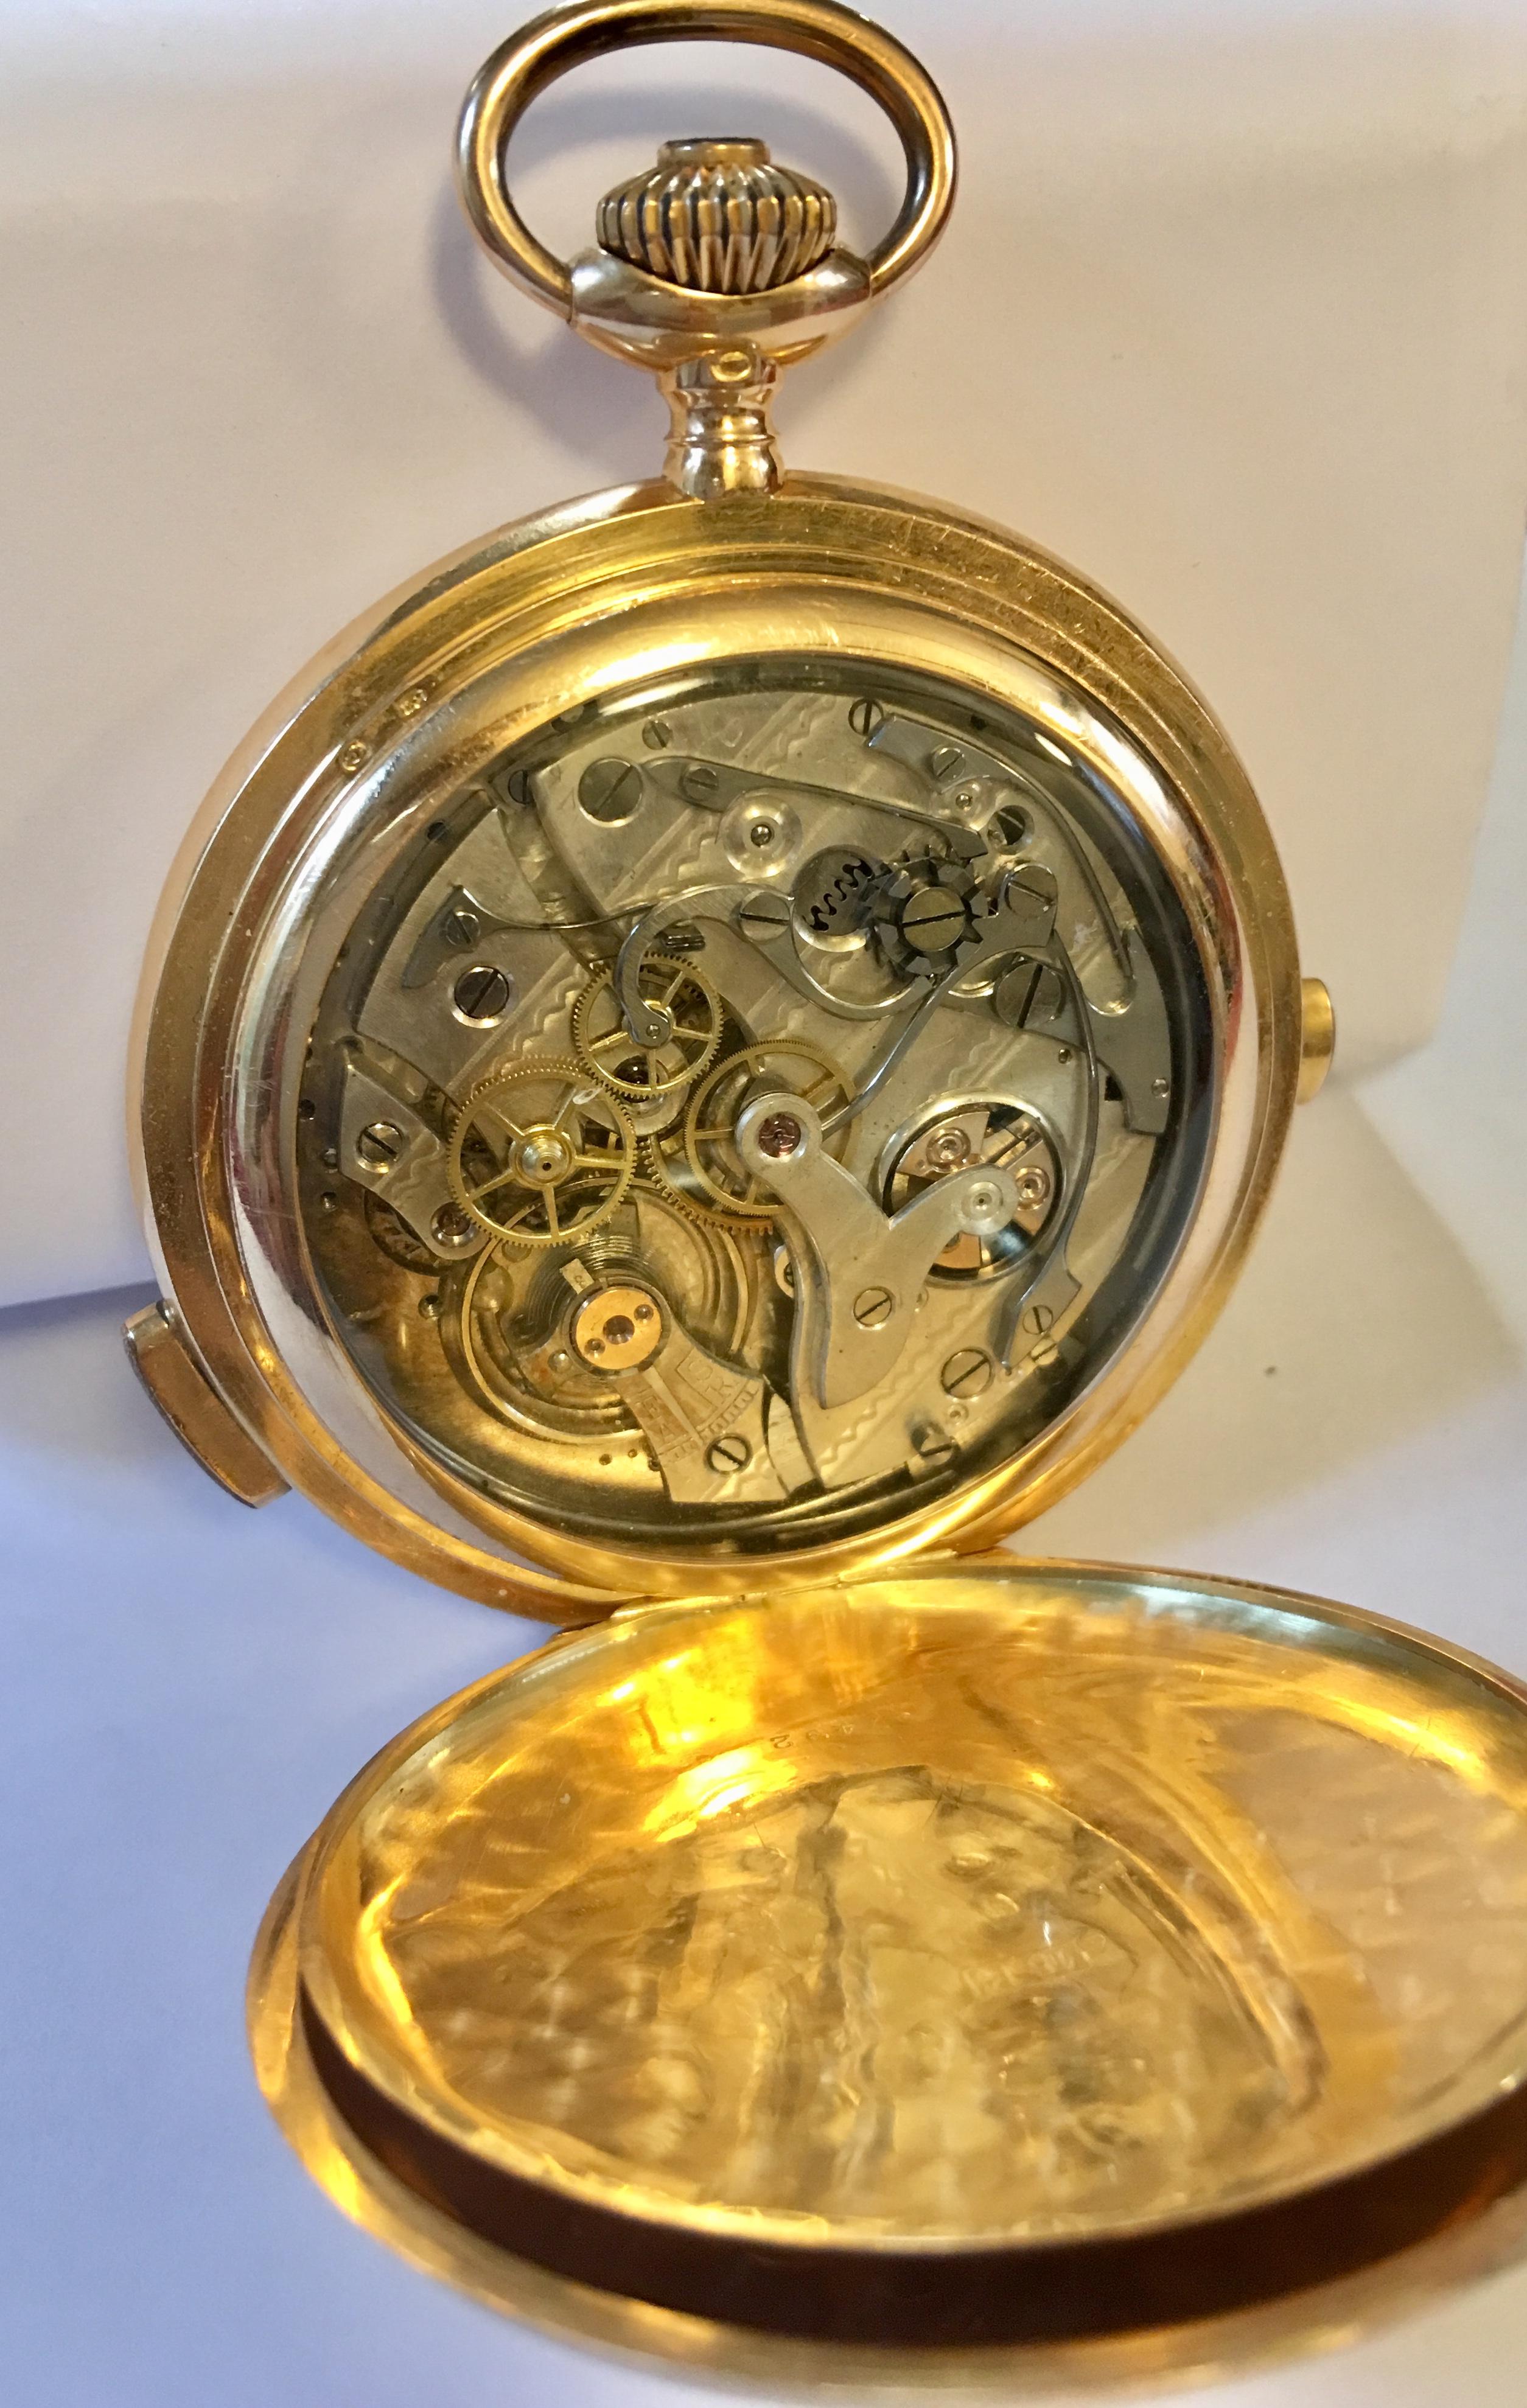 18 Karat Gold Minute Repeater Full Pocket Watch and Chronograph 1